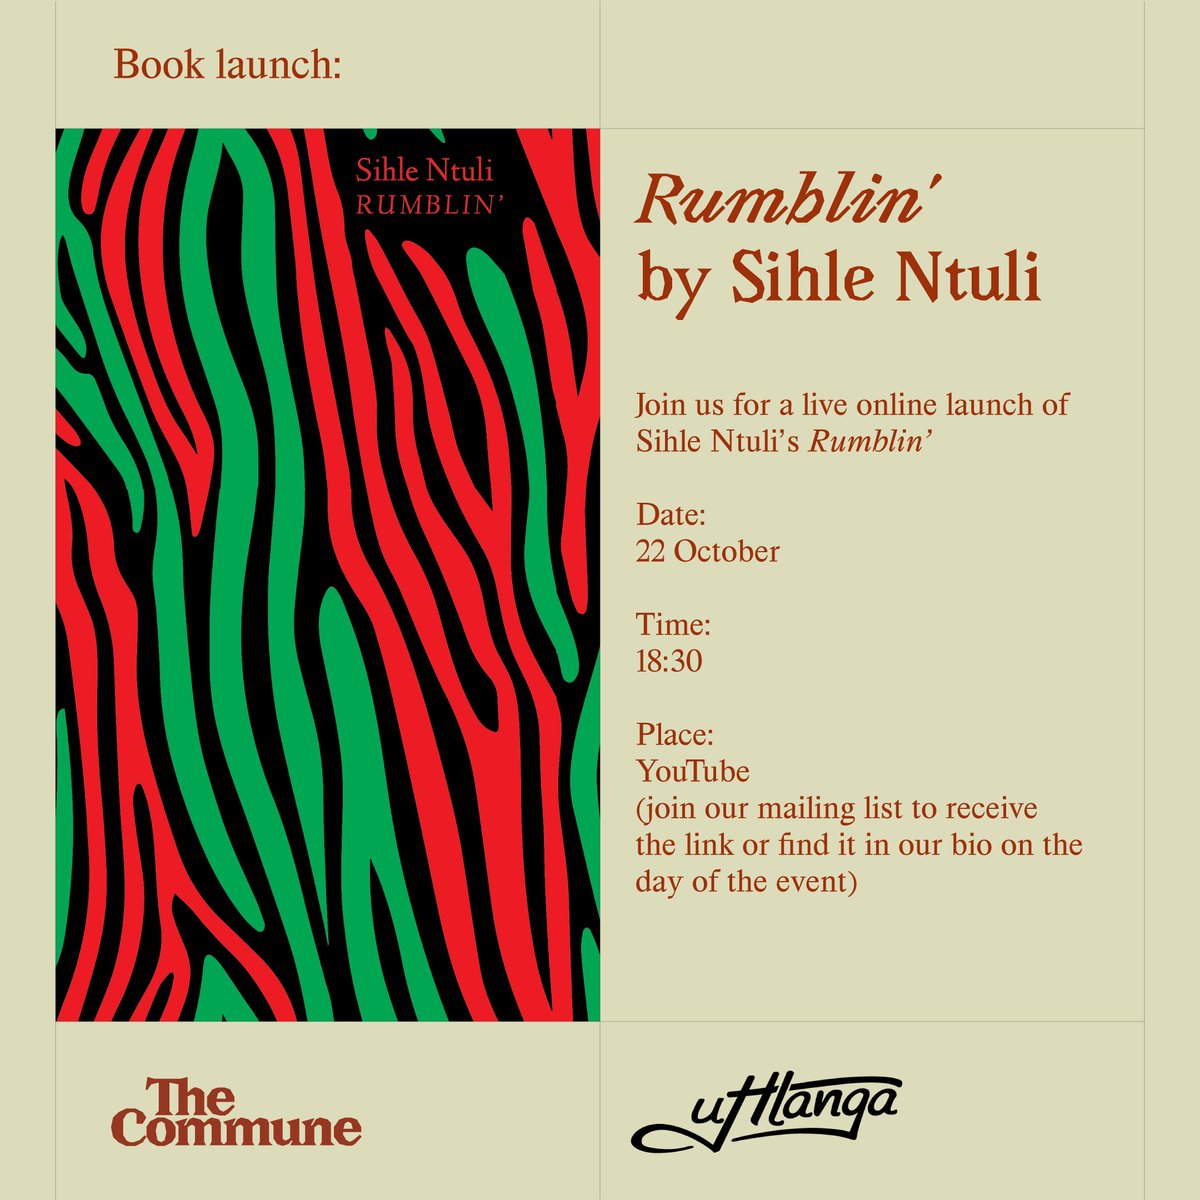 Launch alert! @sihlexntuli will be launching his chapbook RUMBLIN’ online on 22 October in conversation with @NichMulgrew. The launch will be hosted by The Commune in Joburg — please follow or refer to their socials for the link.